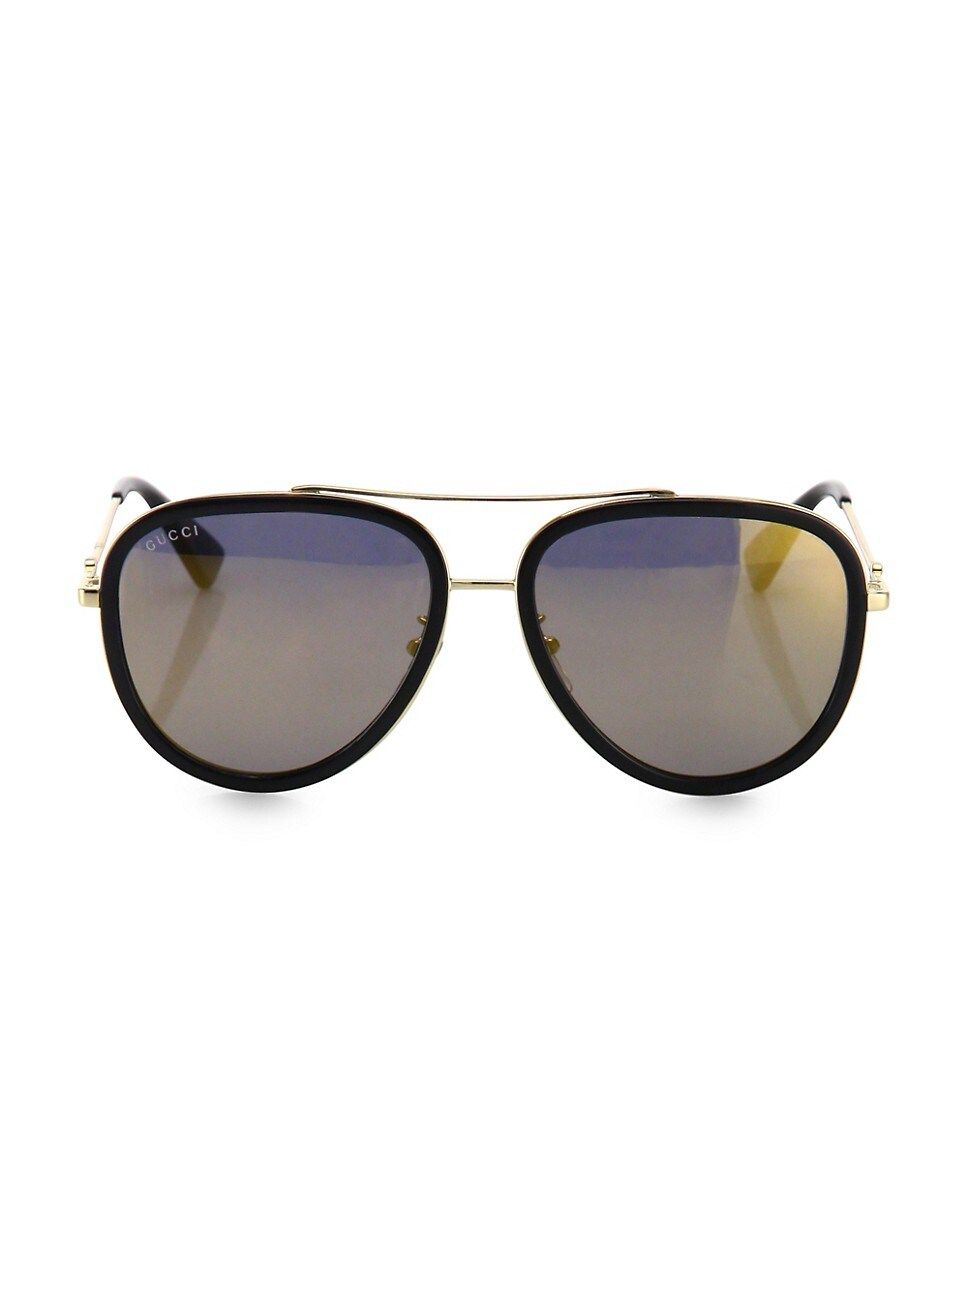 Gucci


57MM Pilot Sunglasses



3.1 out of 5 Customer Rating | Saks Fifth Avenue